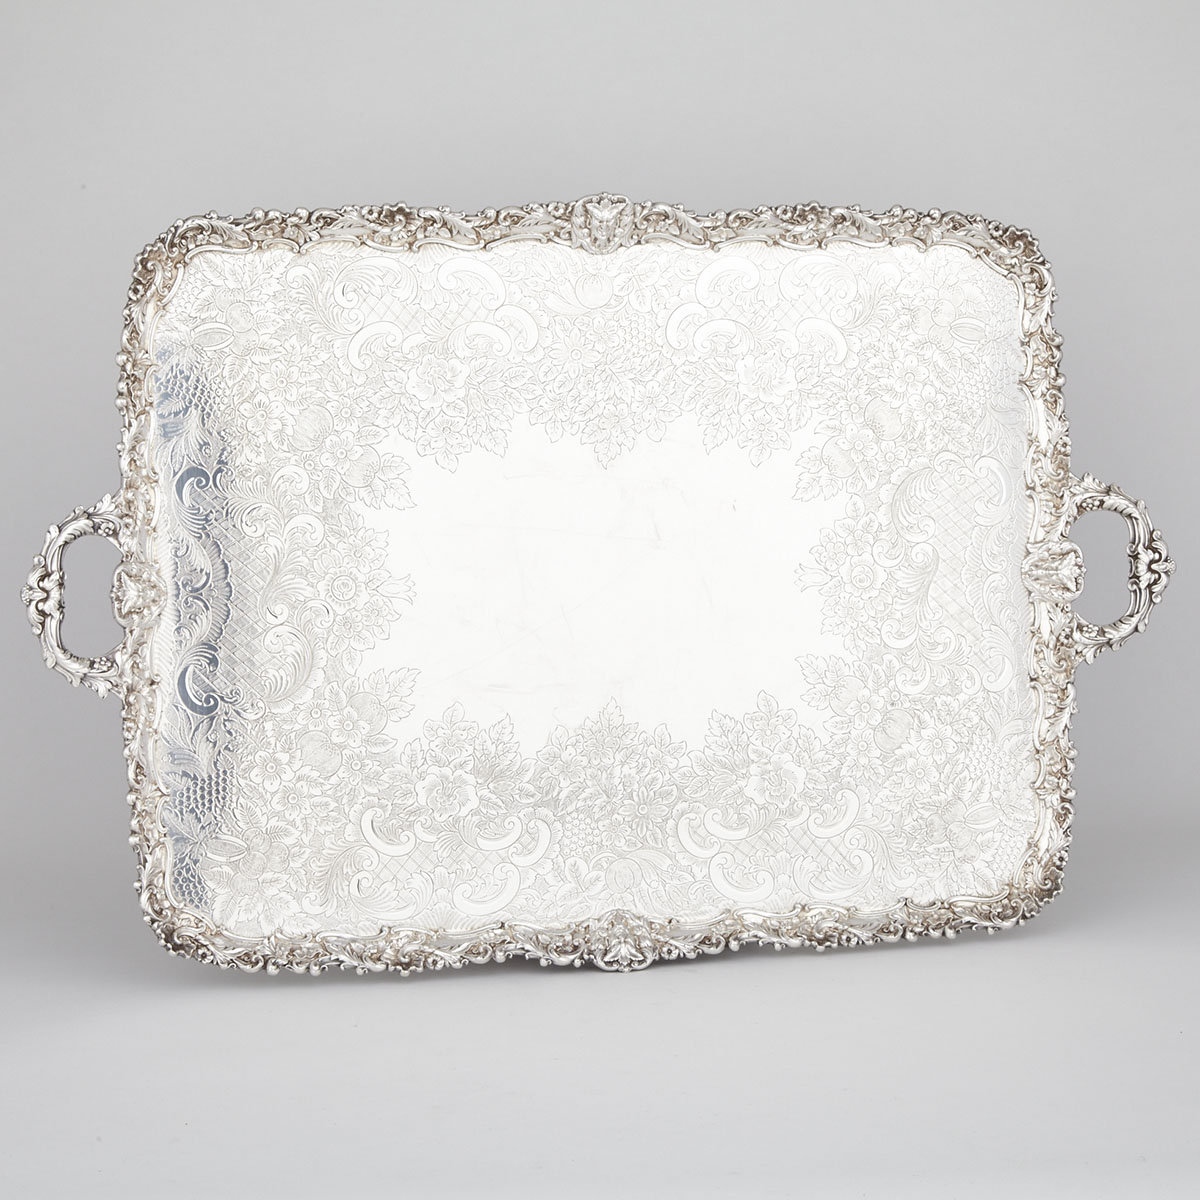 English Silver Plated Two-Handled Rectangular Serving Tray, Barker-Ellis Silver Co., 20th century